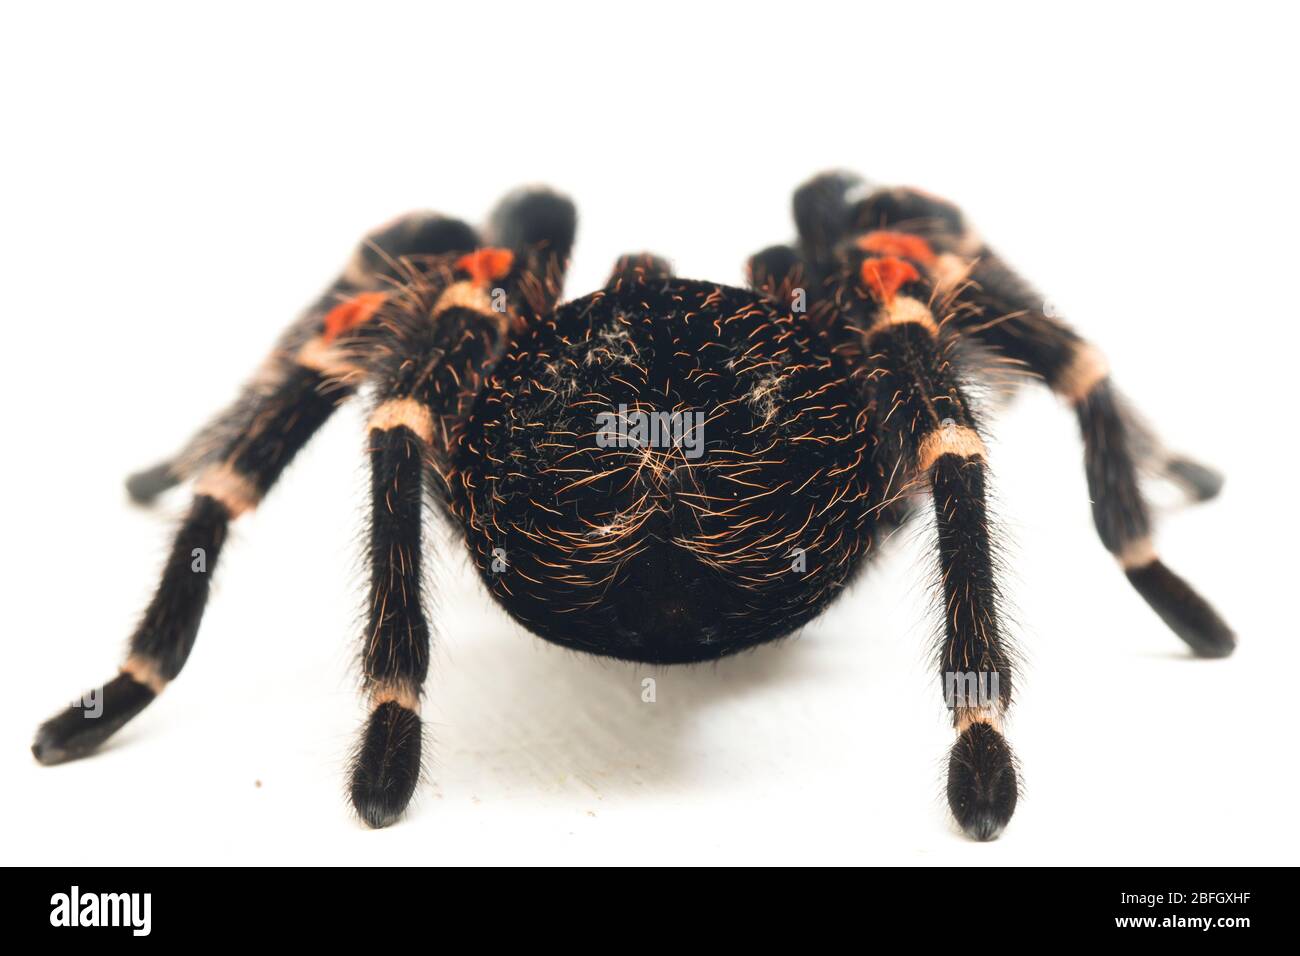 Brachypelma auratum ( Mexican flame knee) is a tarantula endemic to the regions of Guerrero and Michoacán in Mexico. isolated on white background Stock Photo